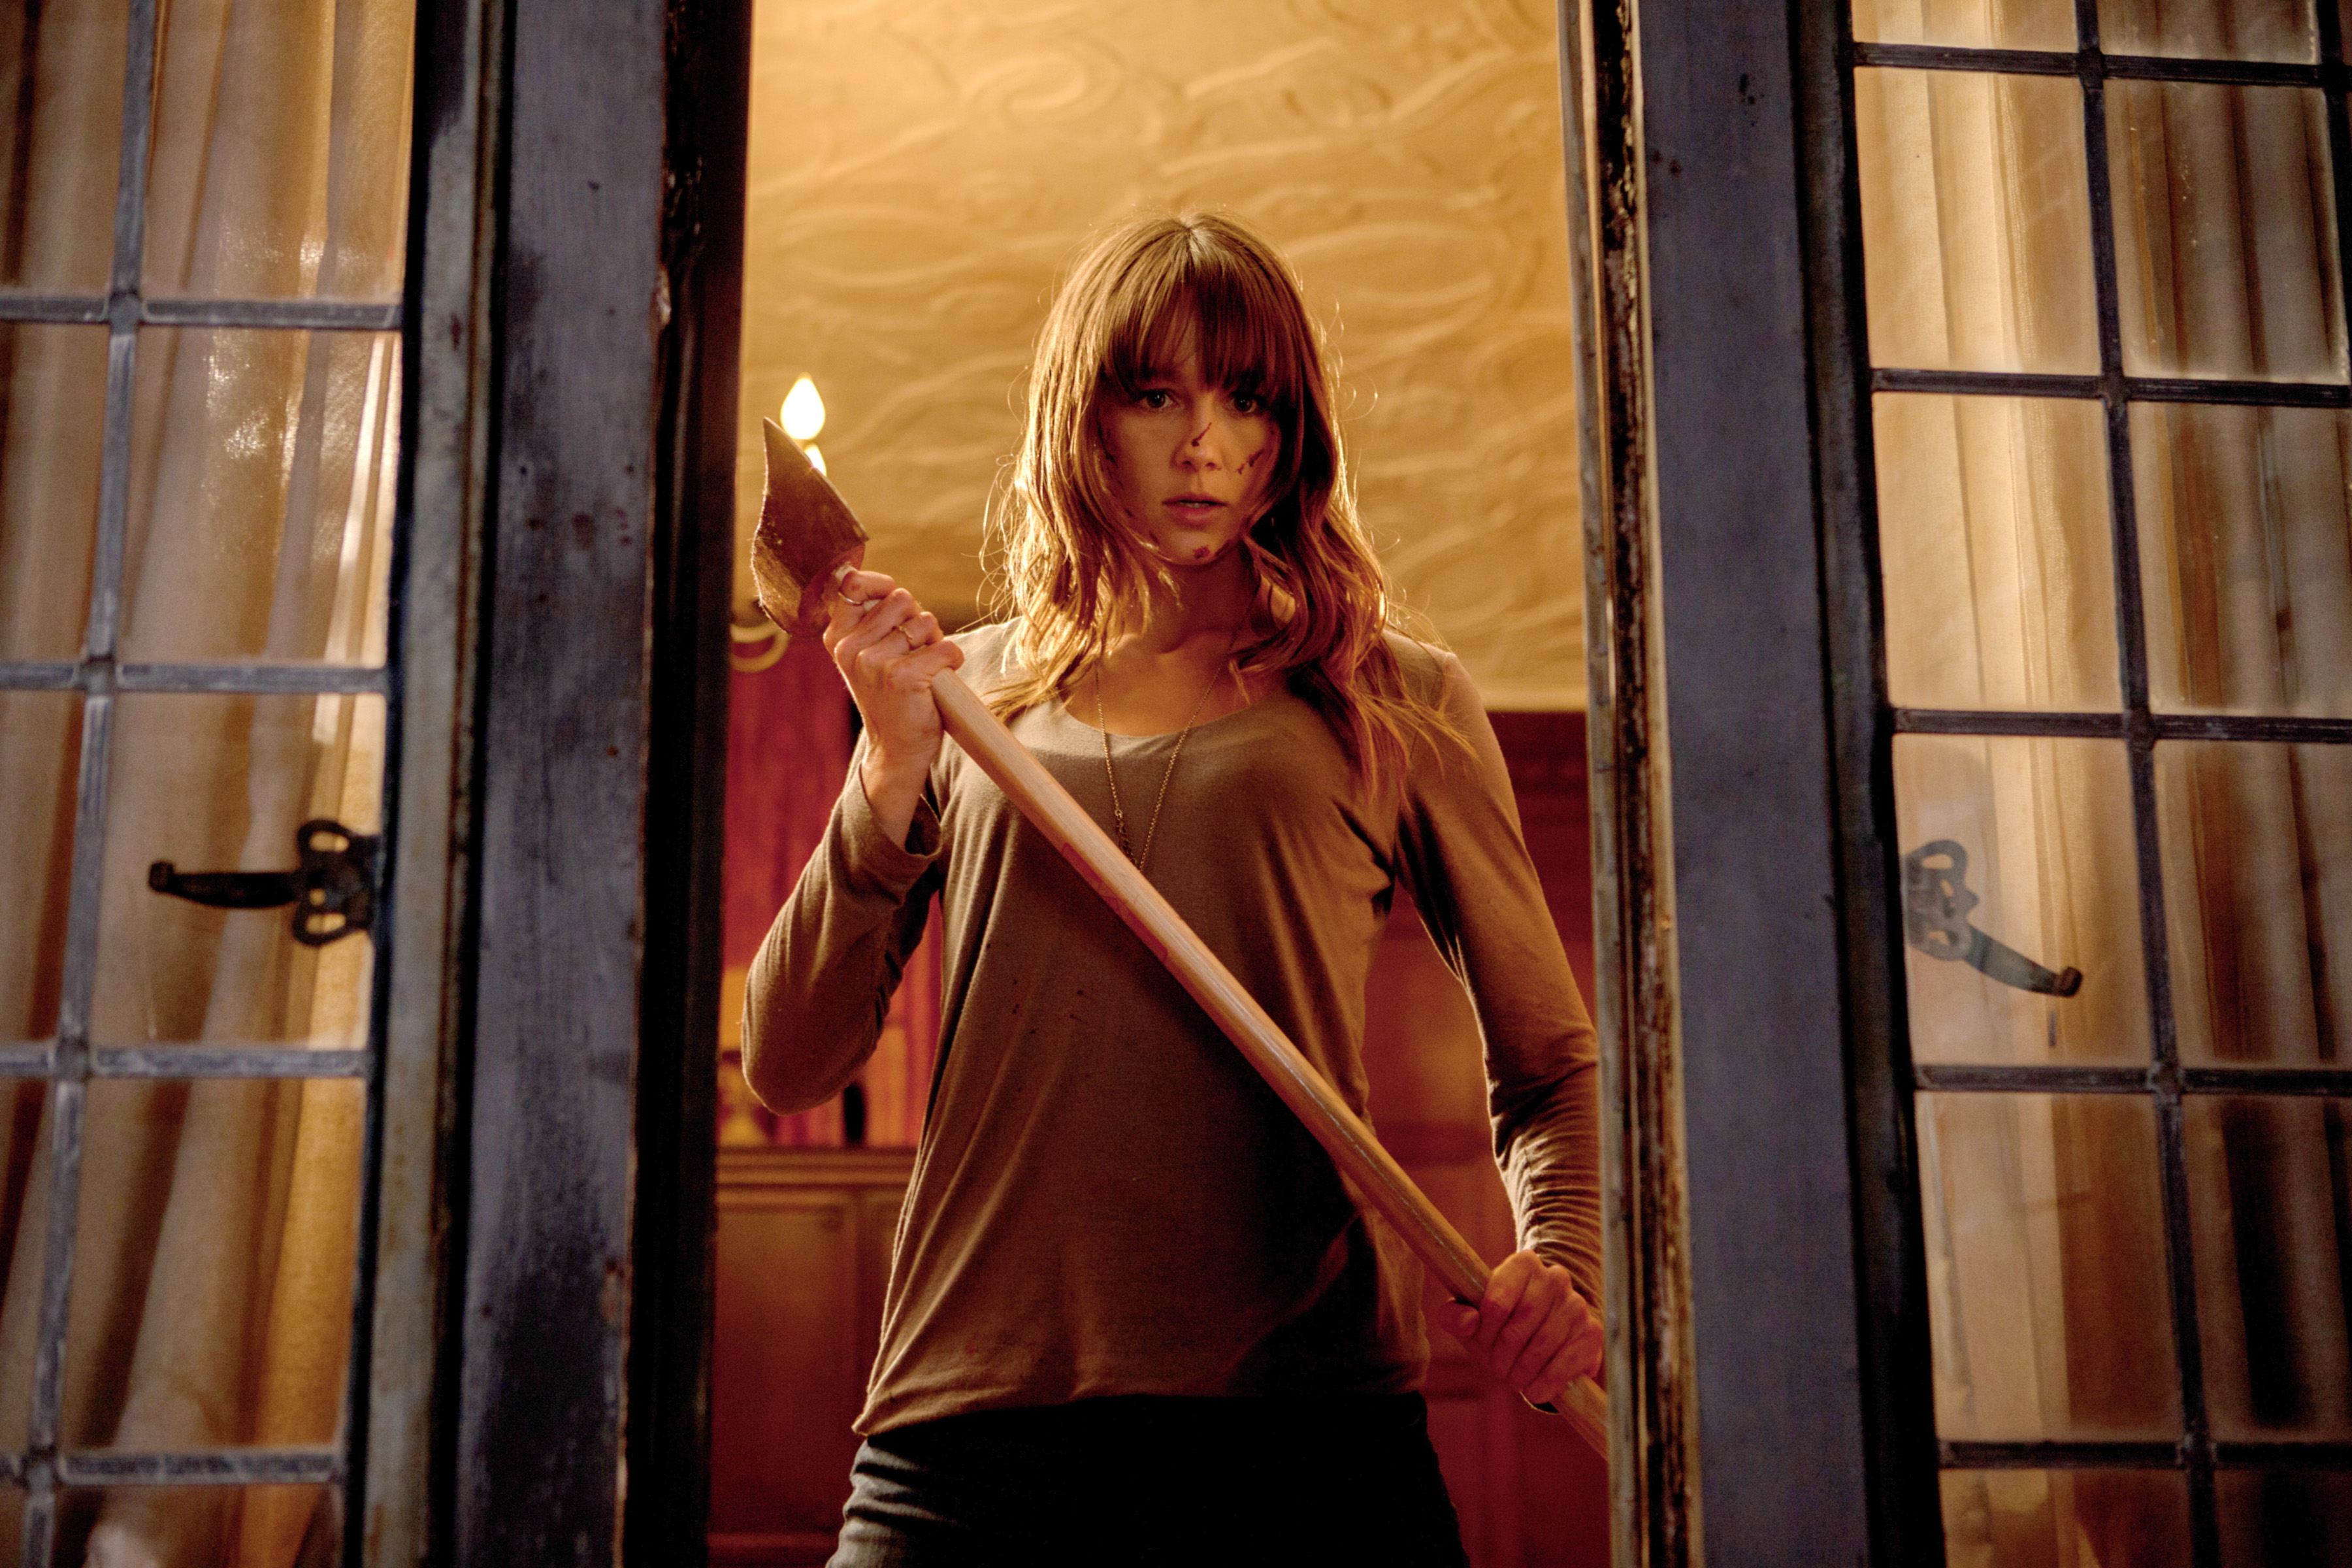 Sharni Vinson in You’re Next seen through a broken window holding an ax covered in blood